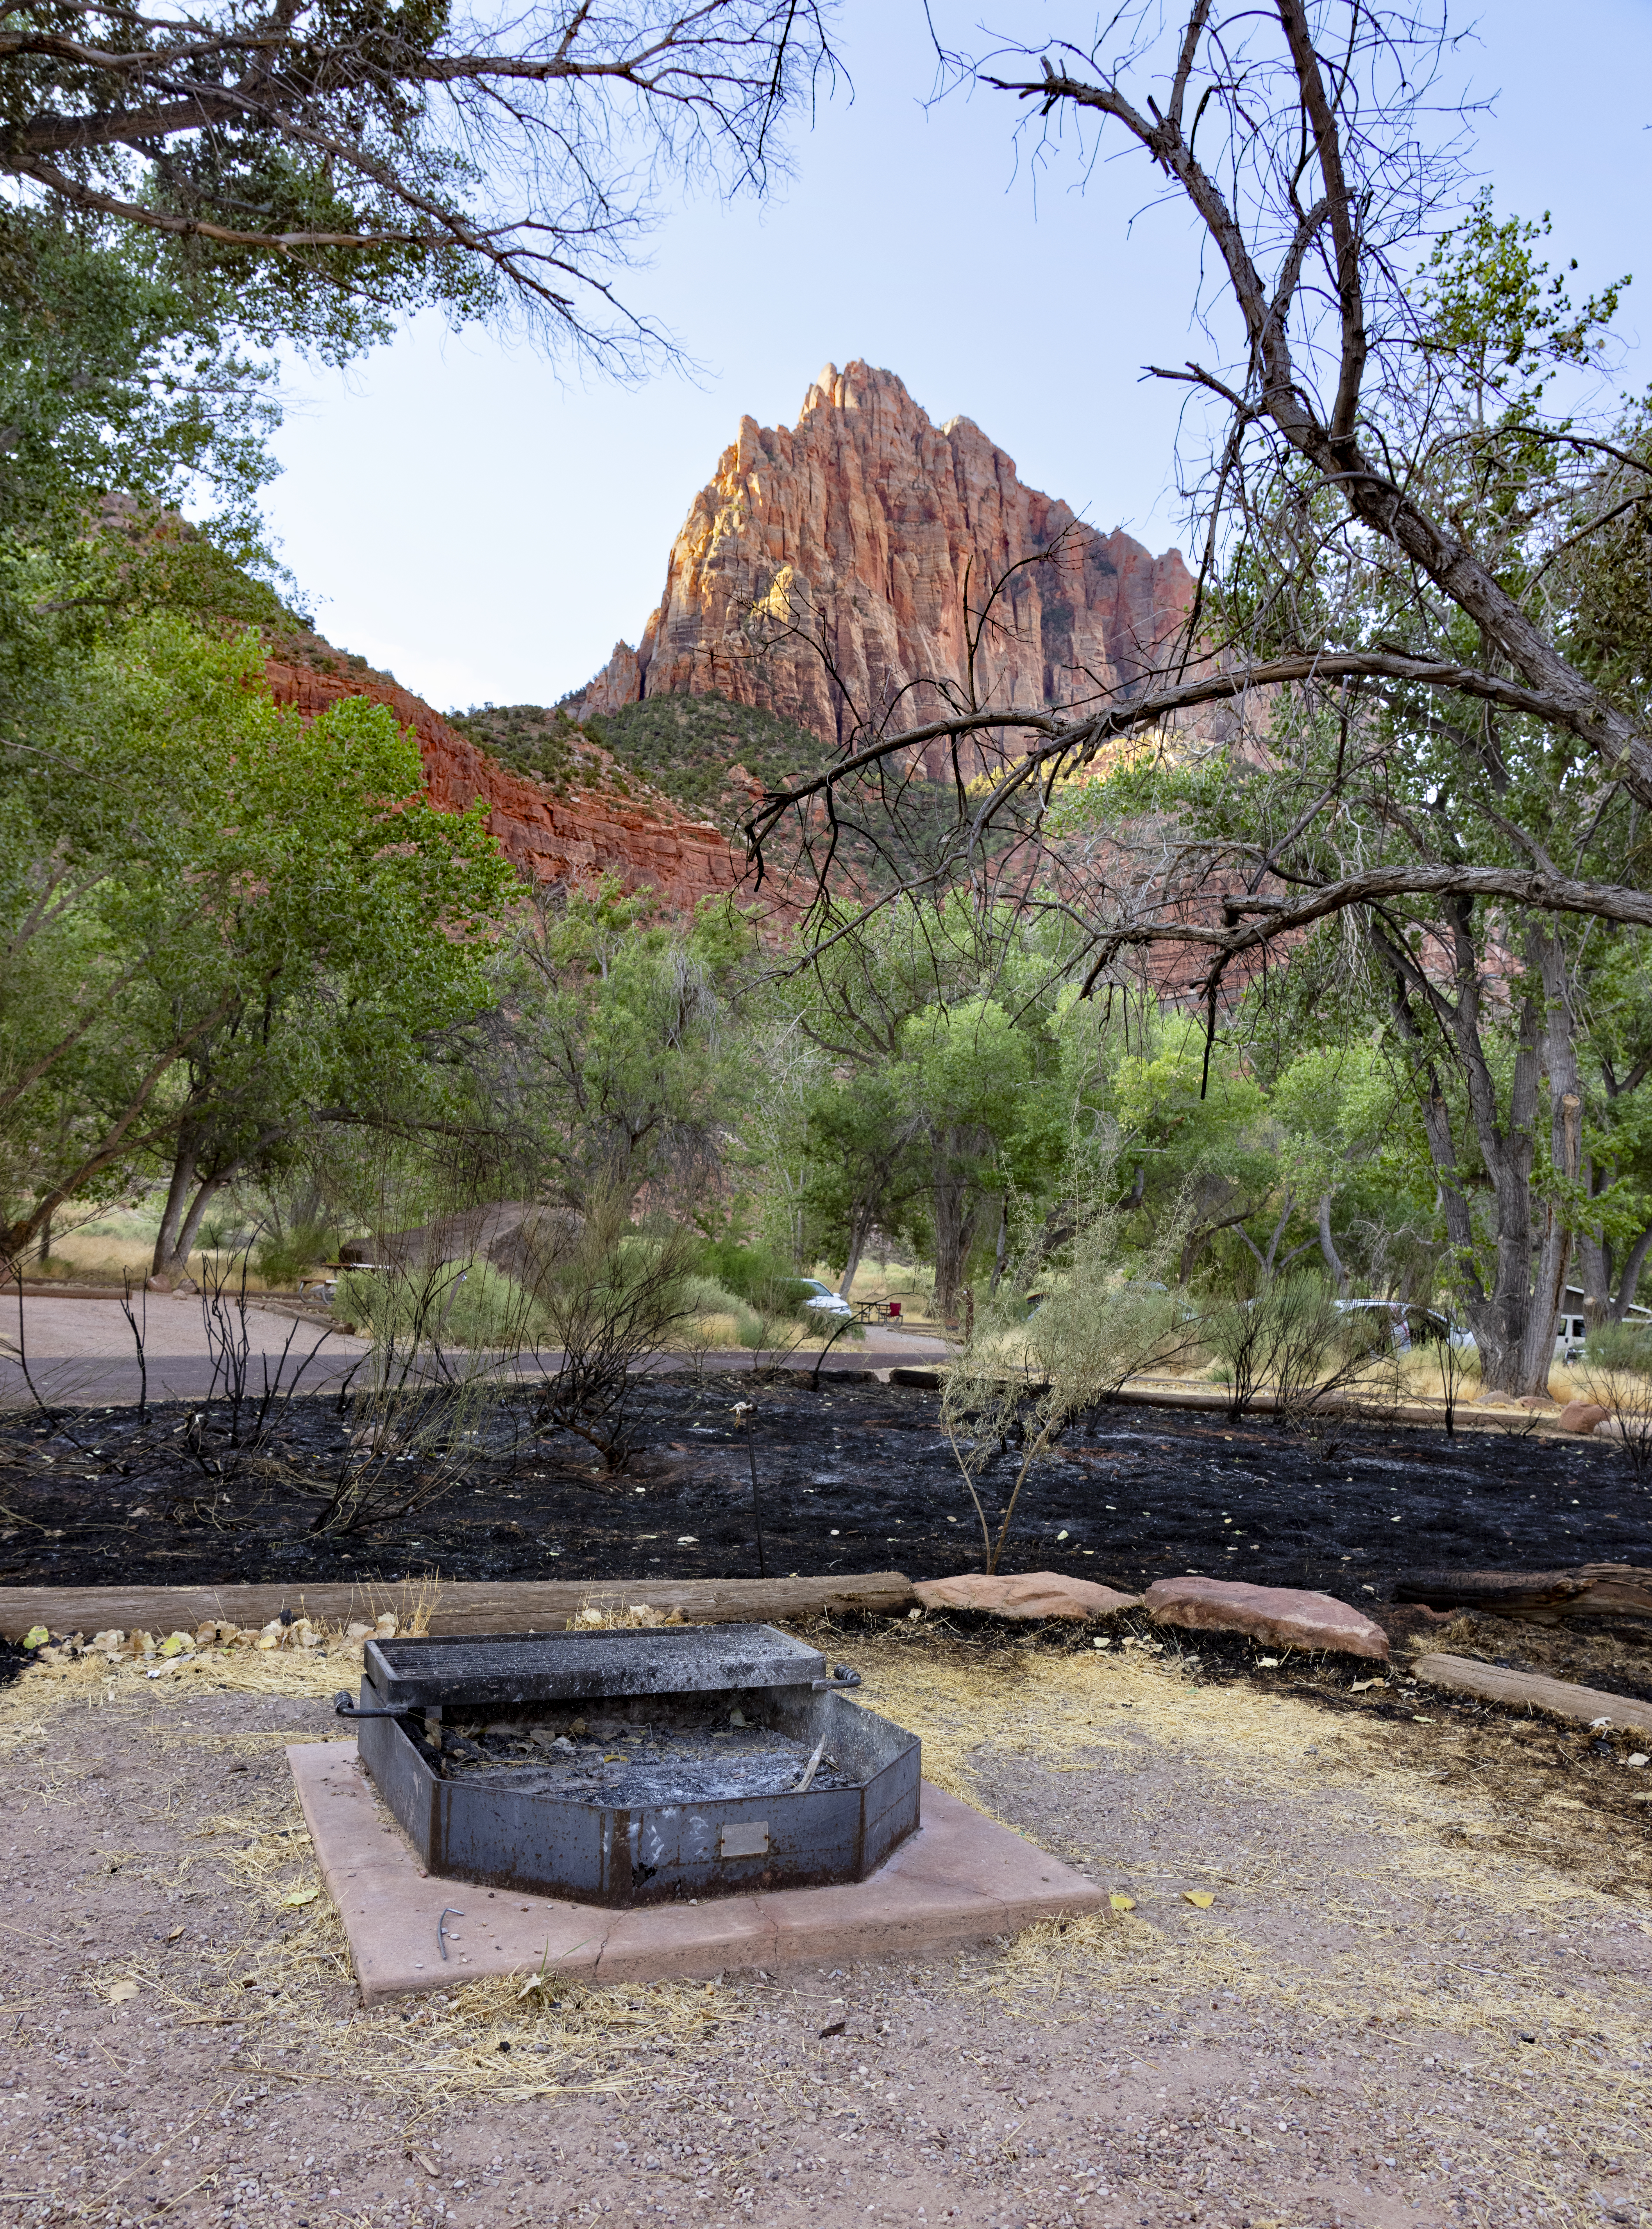 Blackened, burned soil near steel campfire ring surrounded by plants with red rock rising in the distance.